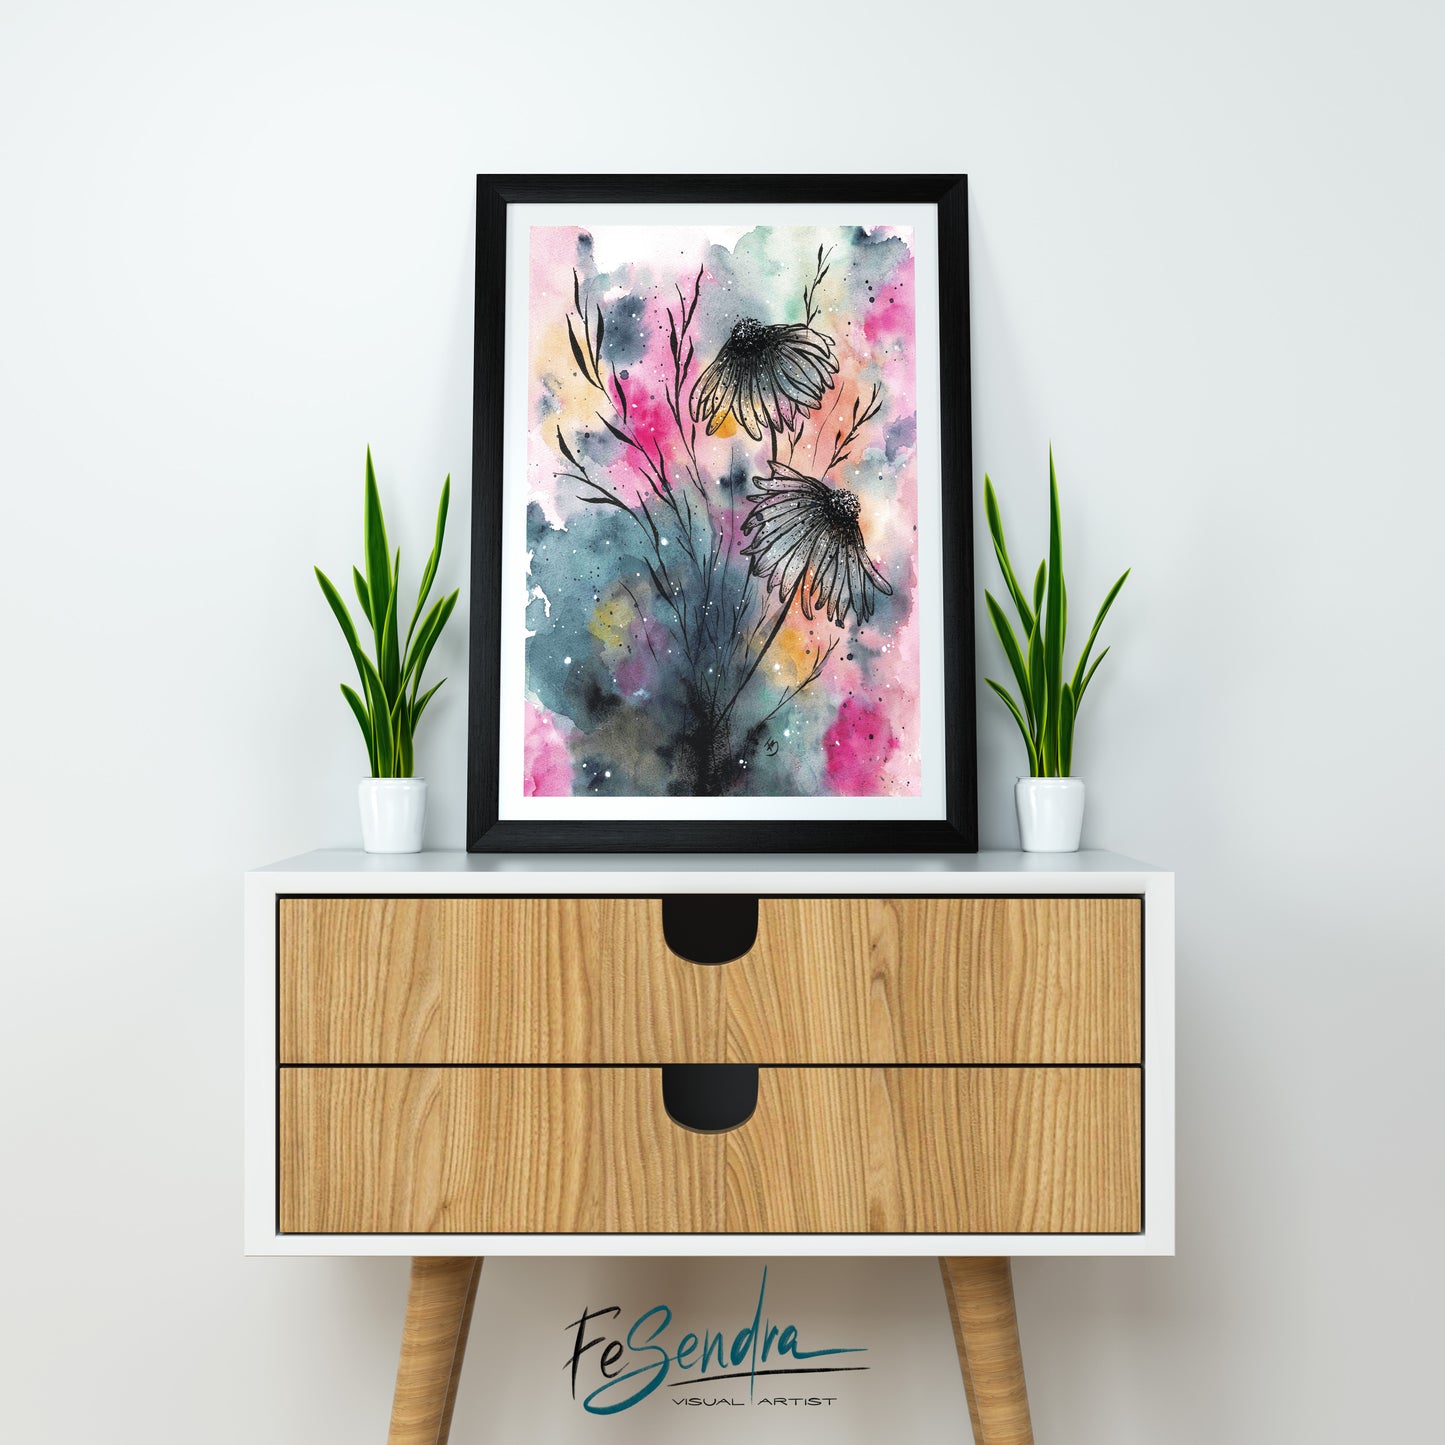 Printed Poster - Flowers and colors by FeSendra